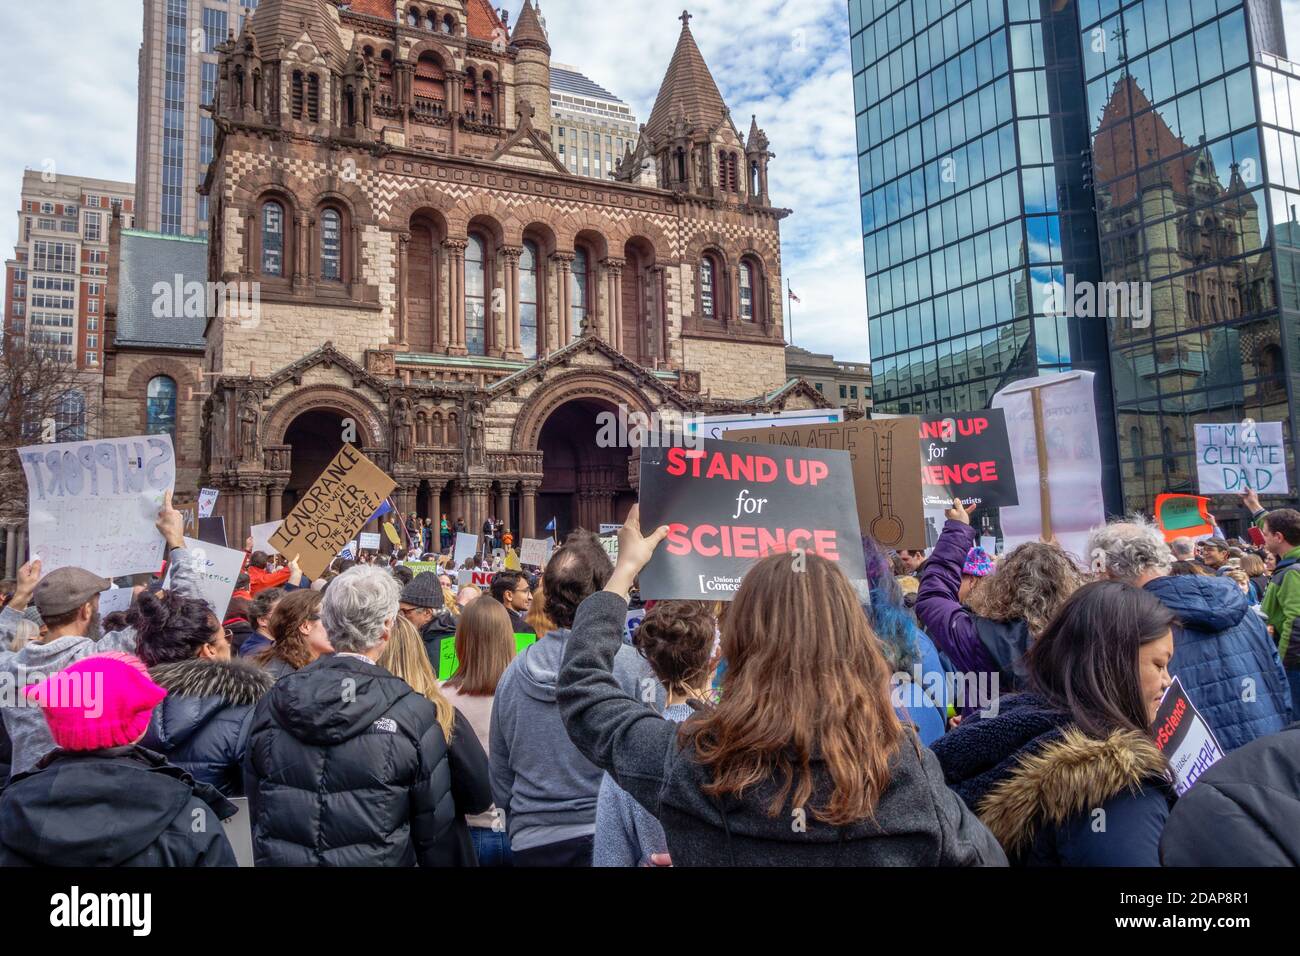 Protesters hold signs at Climate Change Demonstration in Boston, Massachusetts, USA. Stock Photo